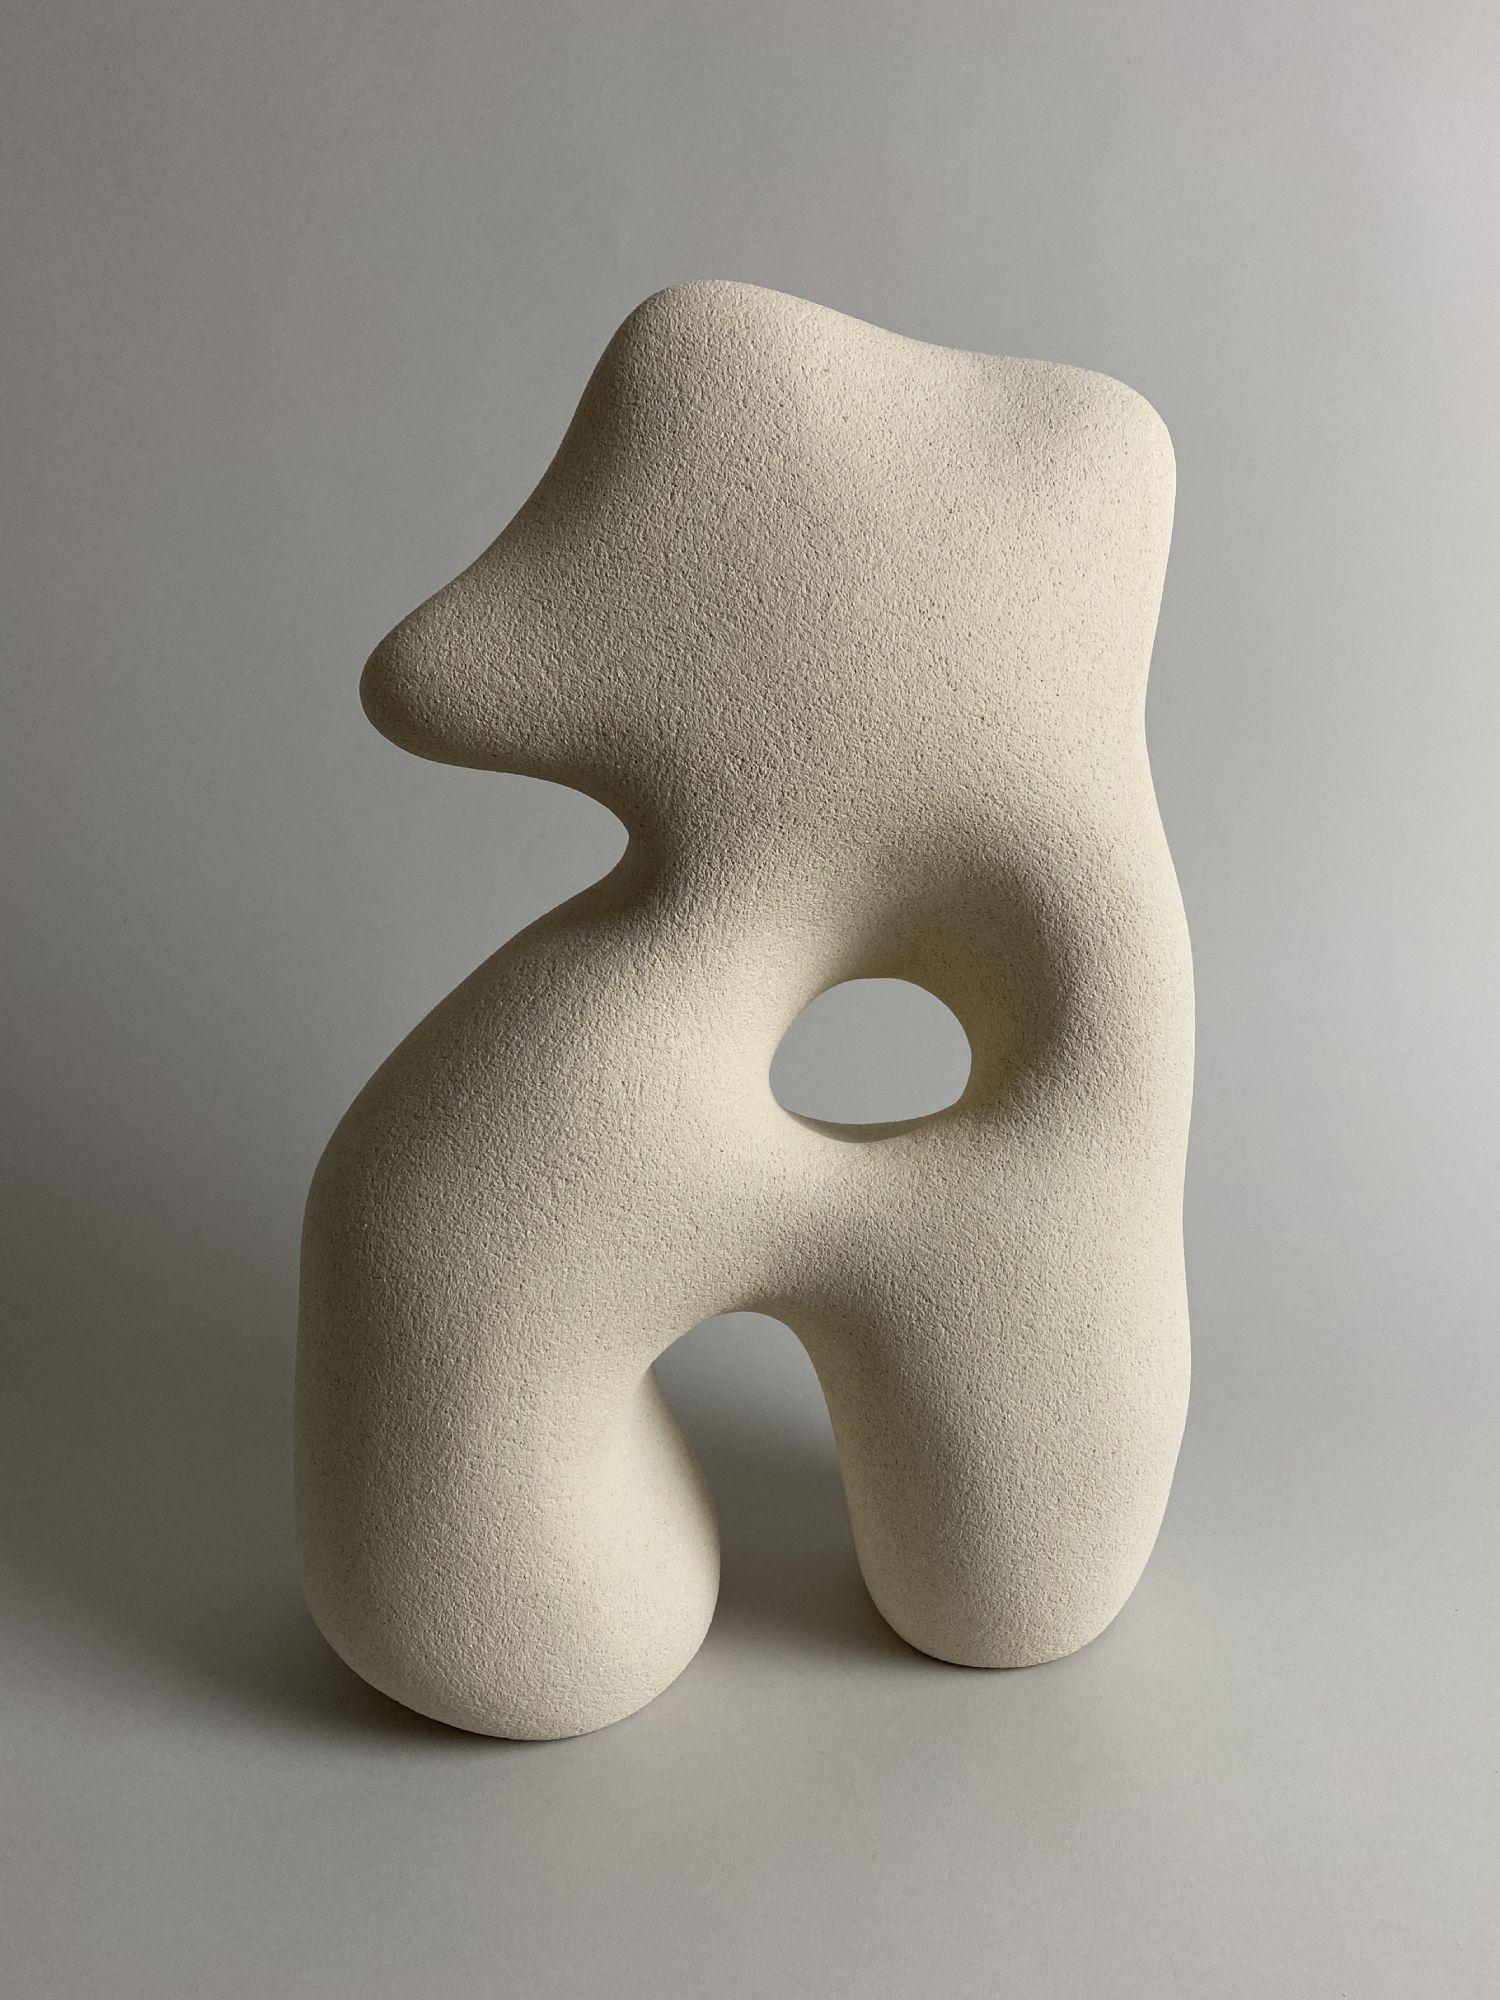 Sandstone Victoire hand sculpted by Hermine Bourdin 
Unique
Dimensions: H 35 x W 23 cm
Materials: Sandstone

In my work I’m trying to represent women who are free, who are generous, voluptuous, sensual, strong, thriving and protective.

To